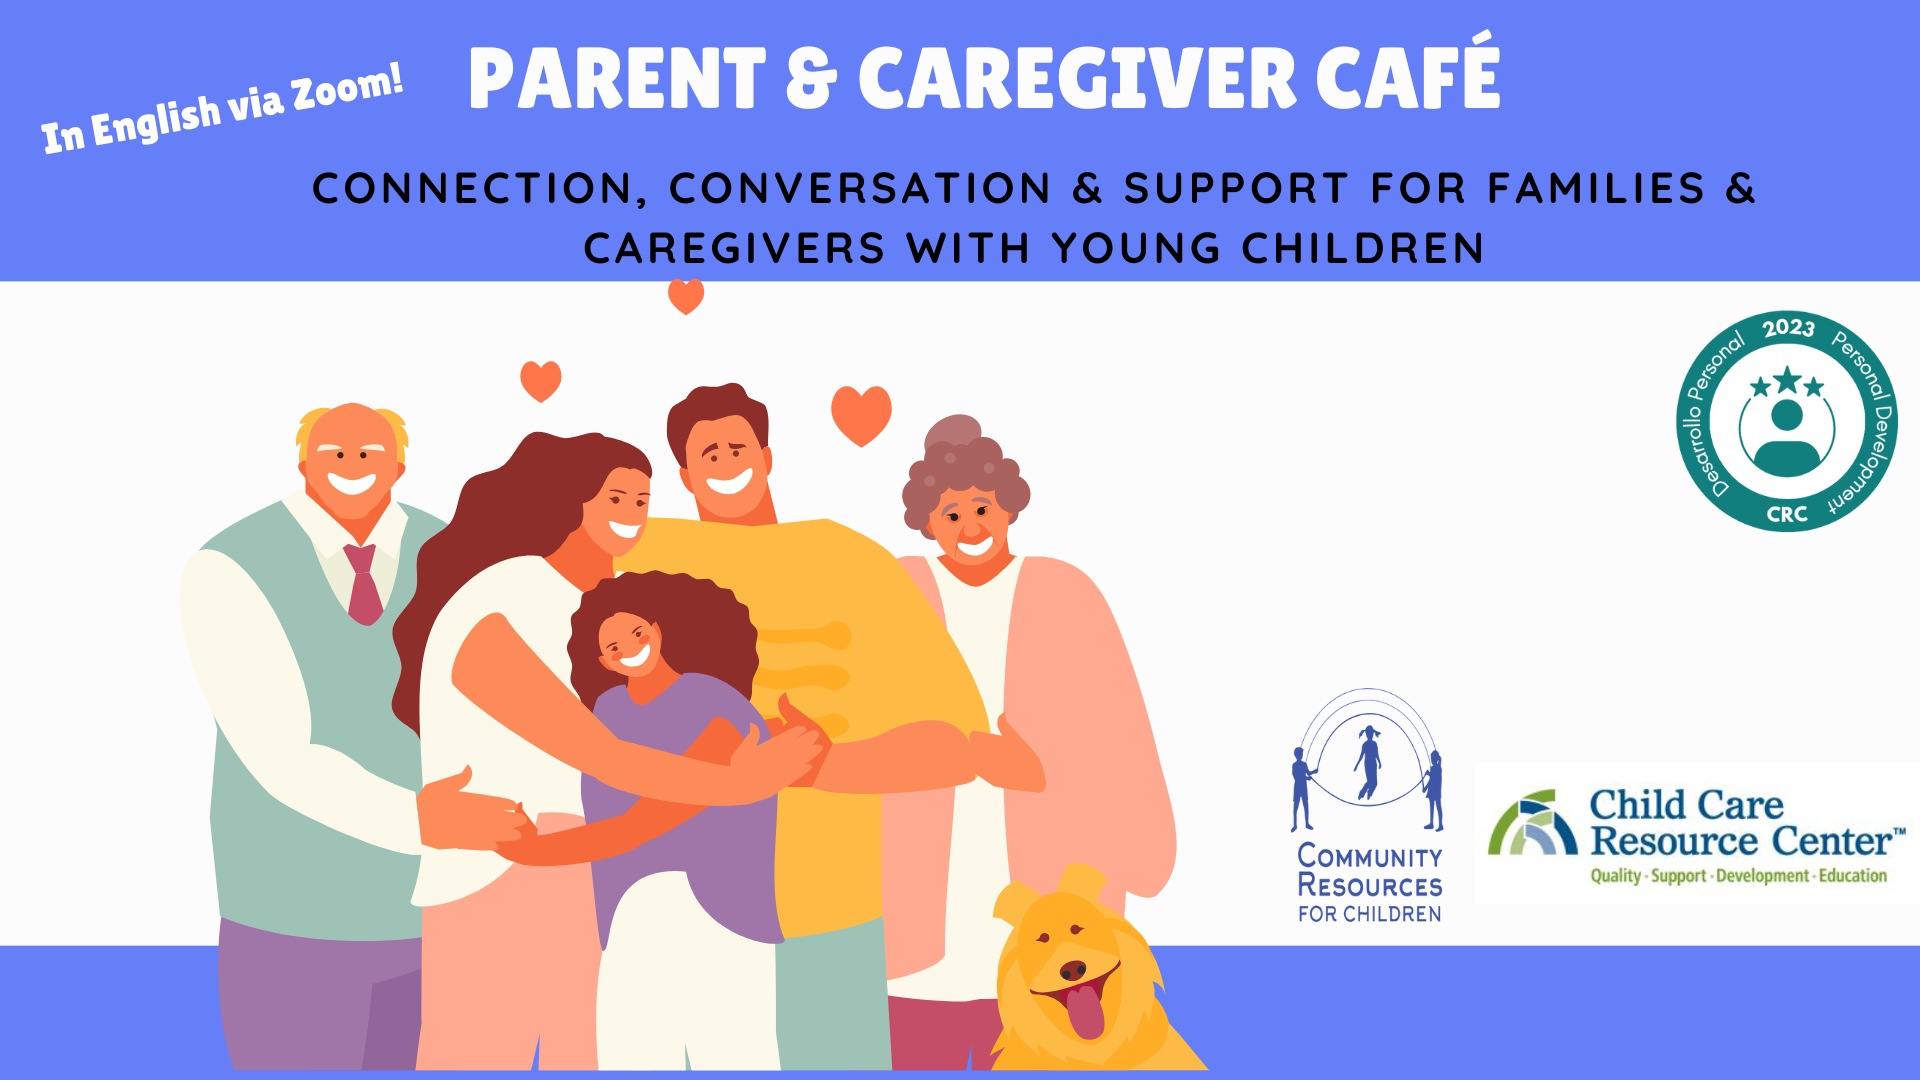 A Parent & Caregiver Café is being held via Zoom to provide connection, conversation, and support for families and caregivers with young children, as well as resources for quality, support, development, and education for children. Full Text: PARENT & CAREGIVER CAFÉ In English via Zoom! CONNECTION, CONVERSATION & SUPPORT FOR FAMILIES & CAREGIVERS WITH YOUNG CHILDREN 2023 Personal Development *> Desarrollo Persona CRC Child Care COMMUNITY Resource Center" RESOURCES Quality - Support - Development - Education FOR CHILDREN